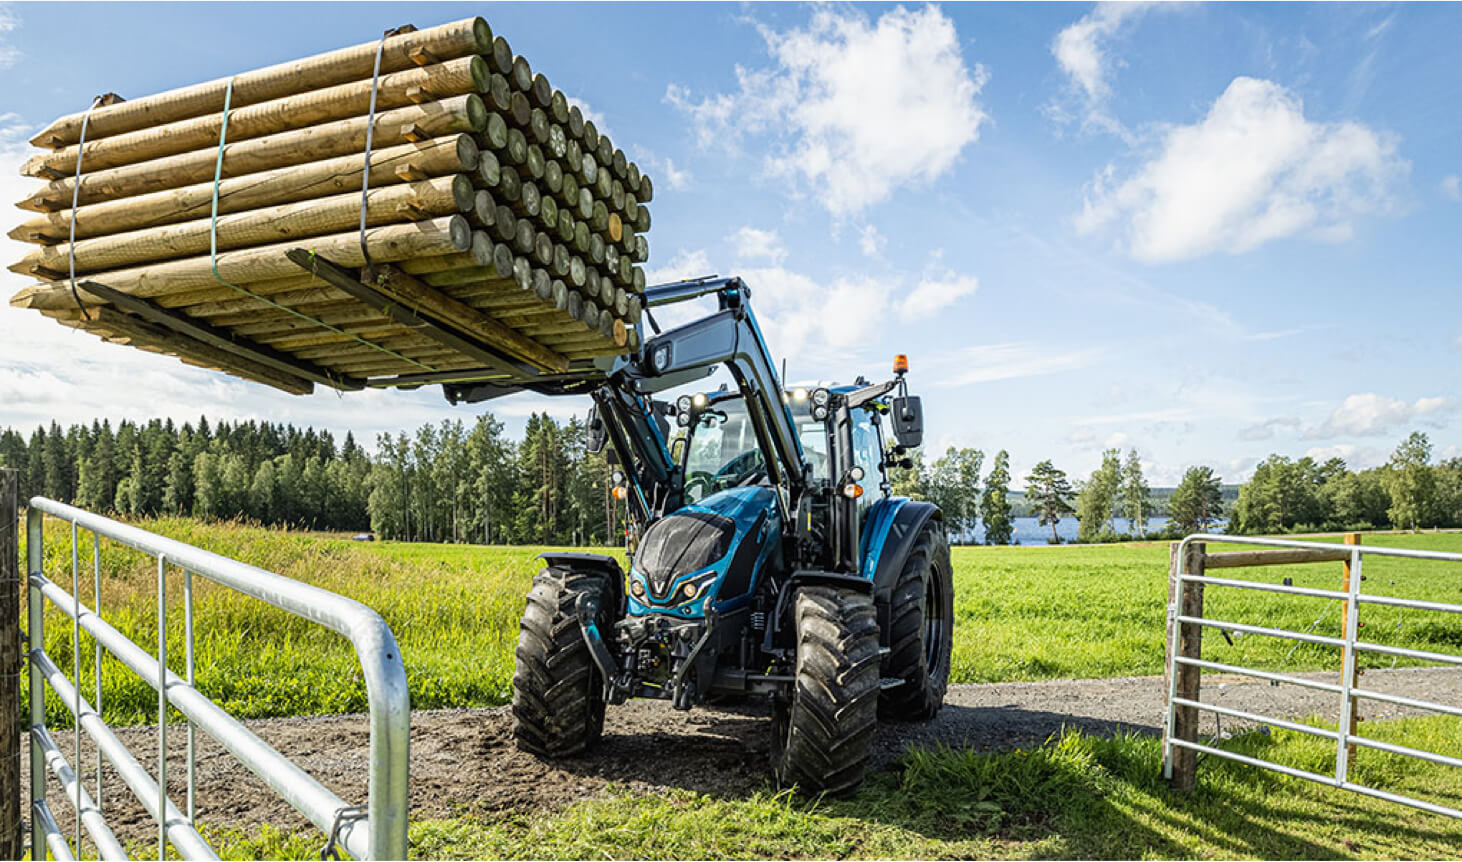 Forklift in use on a field